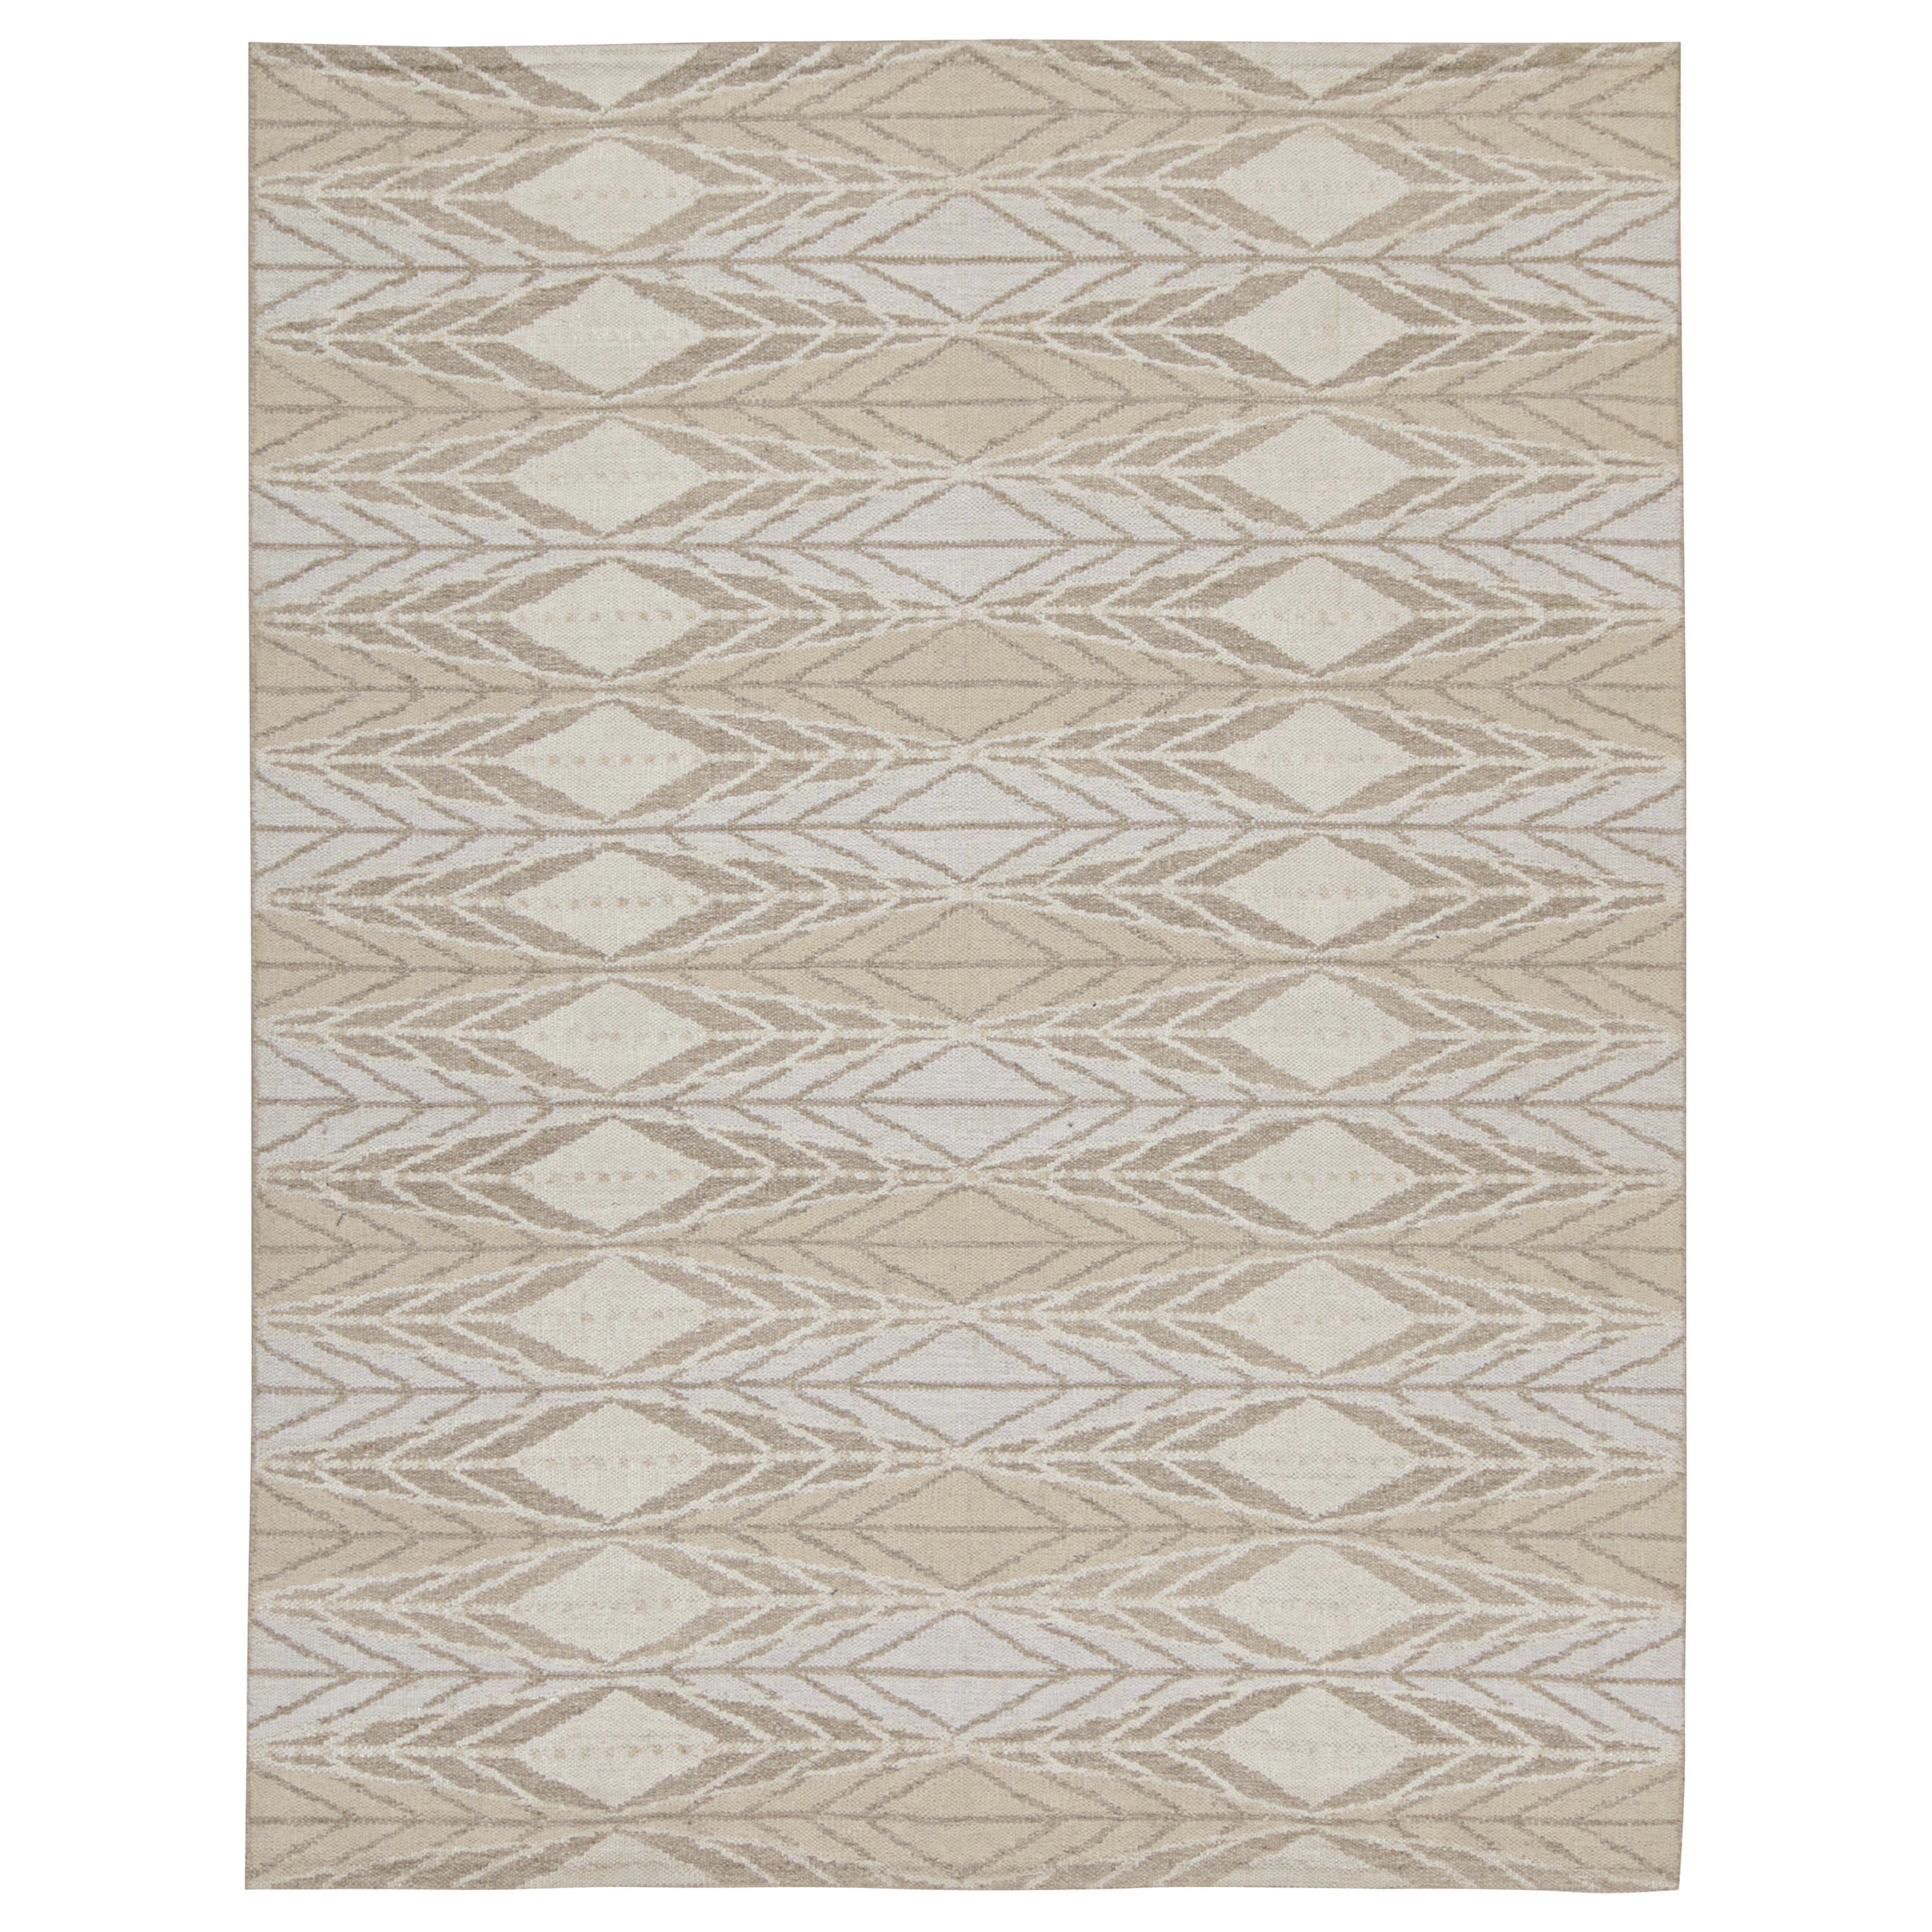 Rug & Kilim’s Scandinavian Style Kilim in Taupe and White Geometric Pattern